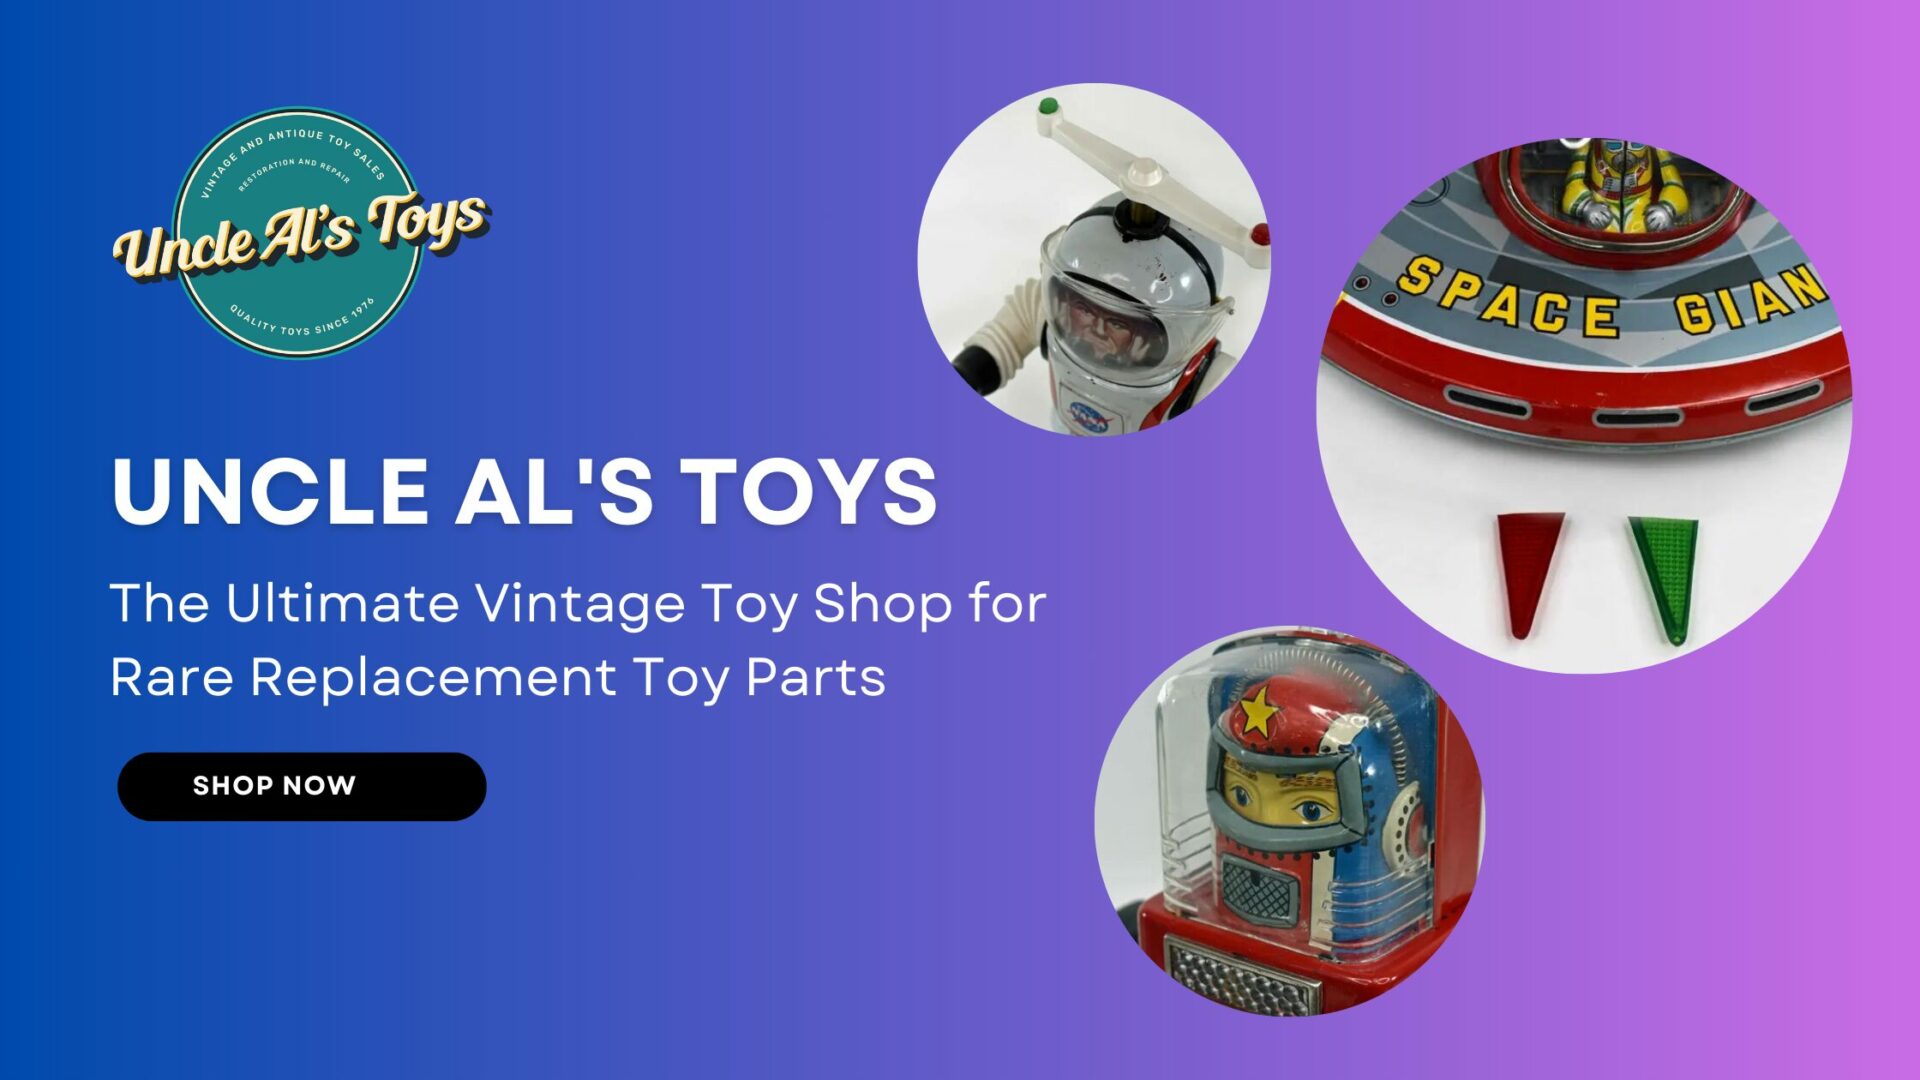 Vintage Toy Shop for Rare Replacement Toy Parts